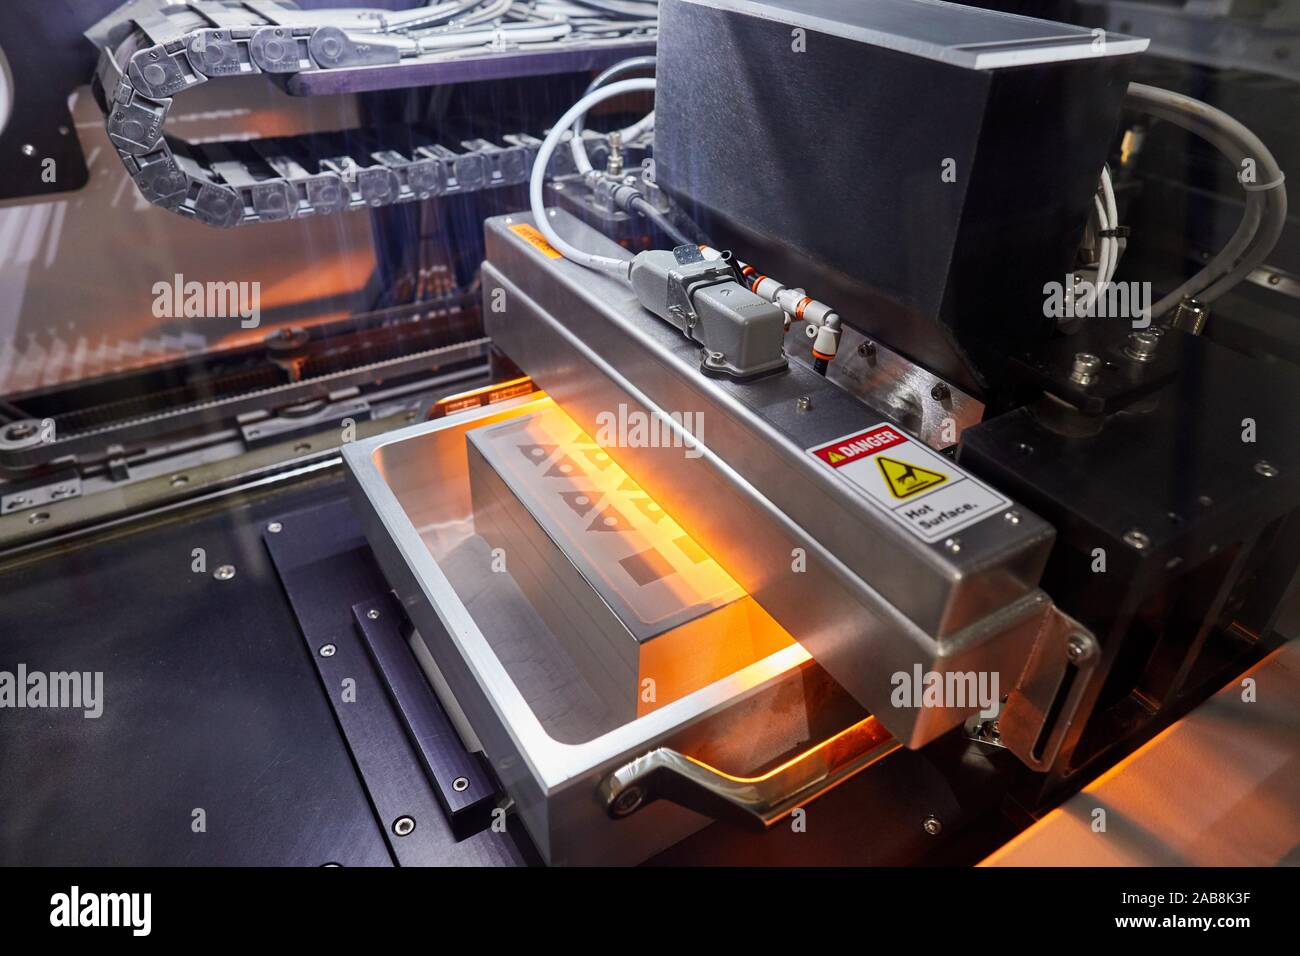 Binder Jetting, Additive manufacturing technology that allows high complexity parts to be manufactured, within a wide range of materials, by Stock Photo